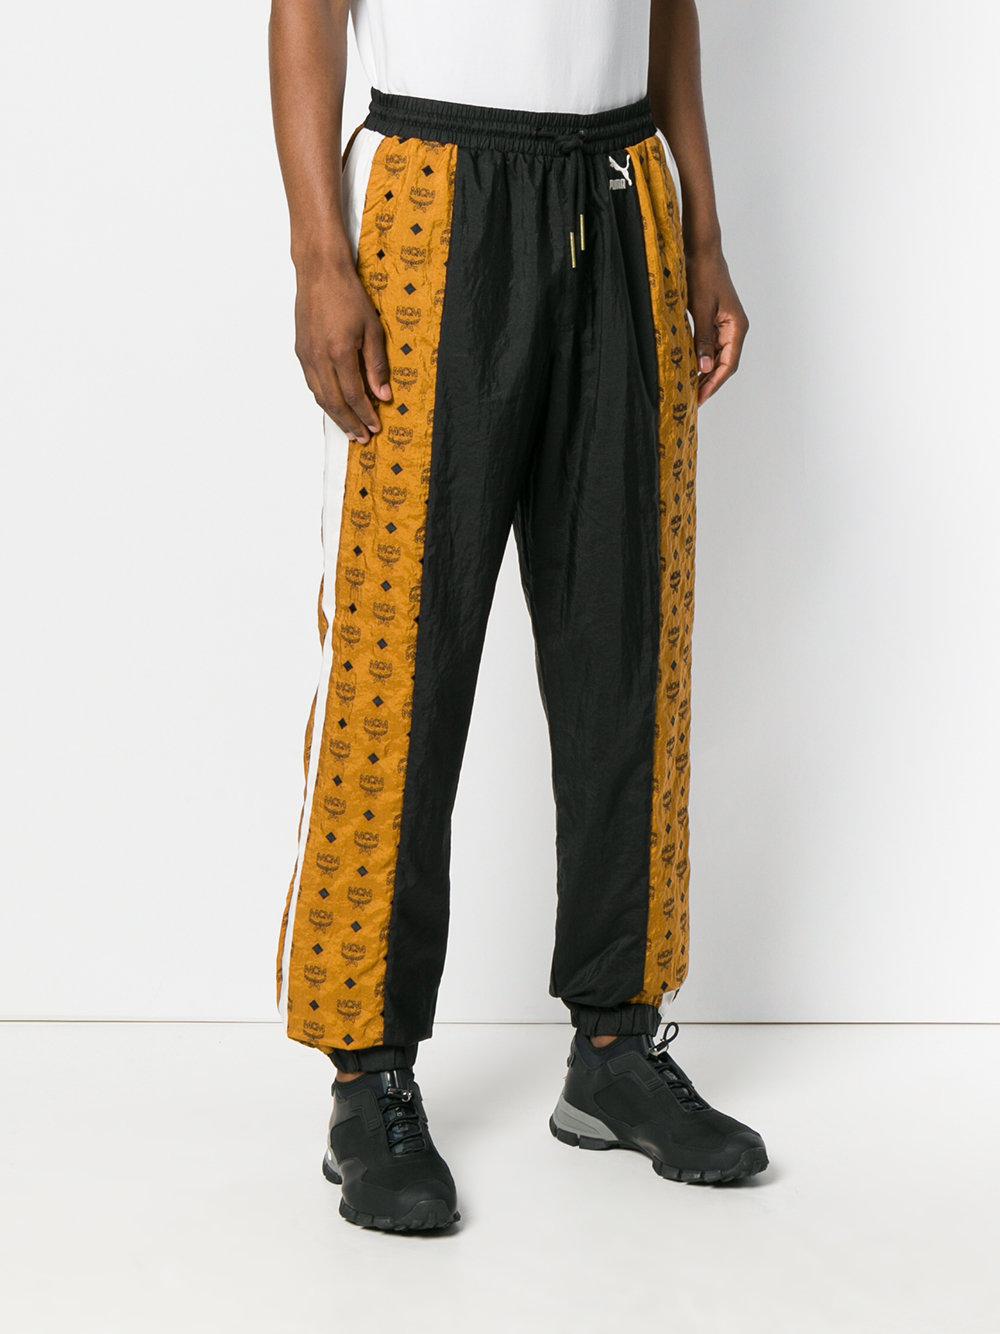 PUMA Synthetic X Mcm Track Pants in Black for Men - Lyst